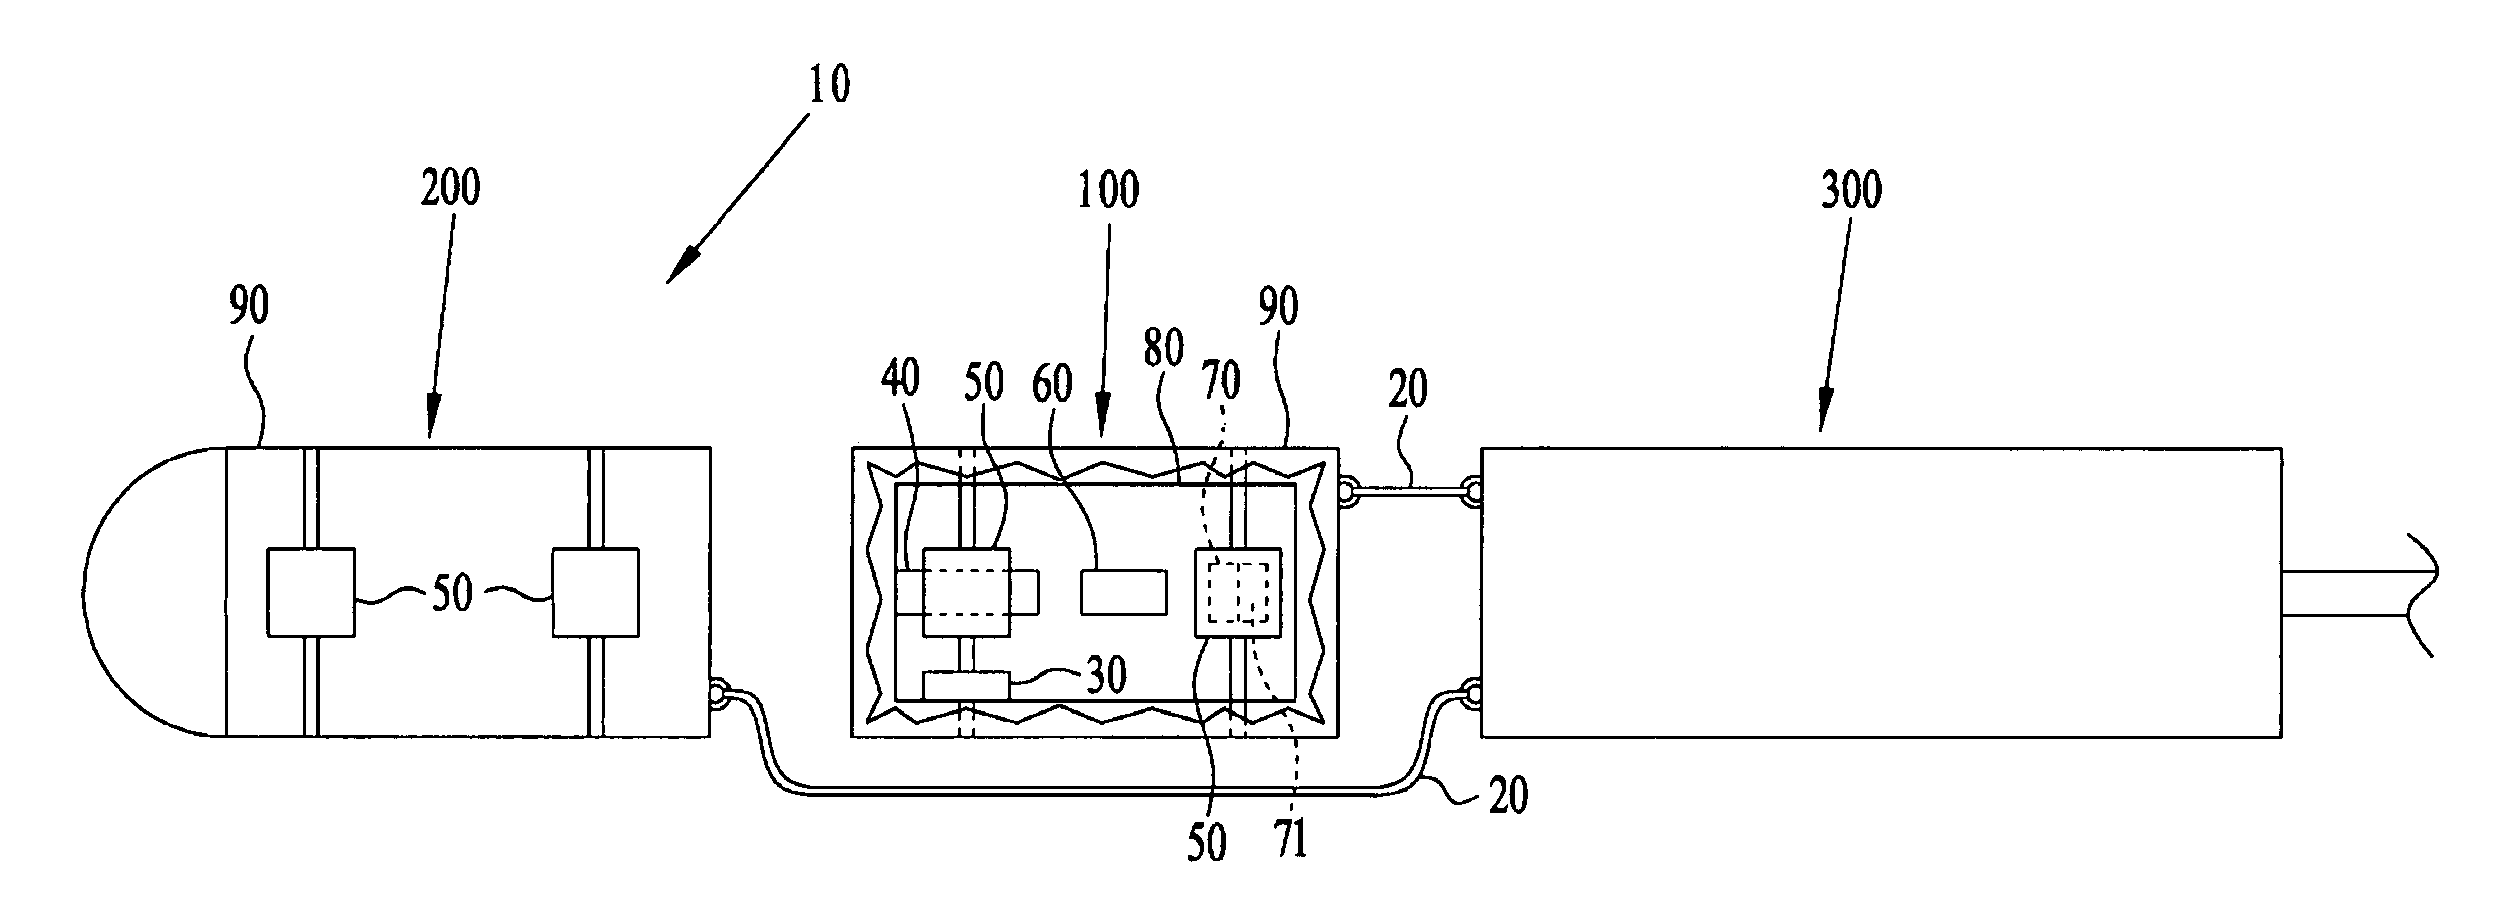 Locator device for submerged structures